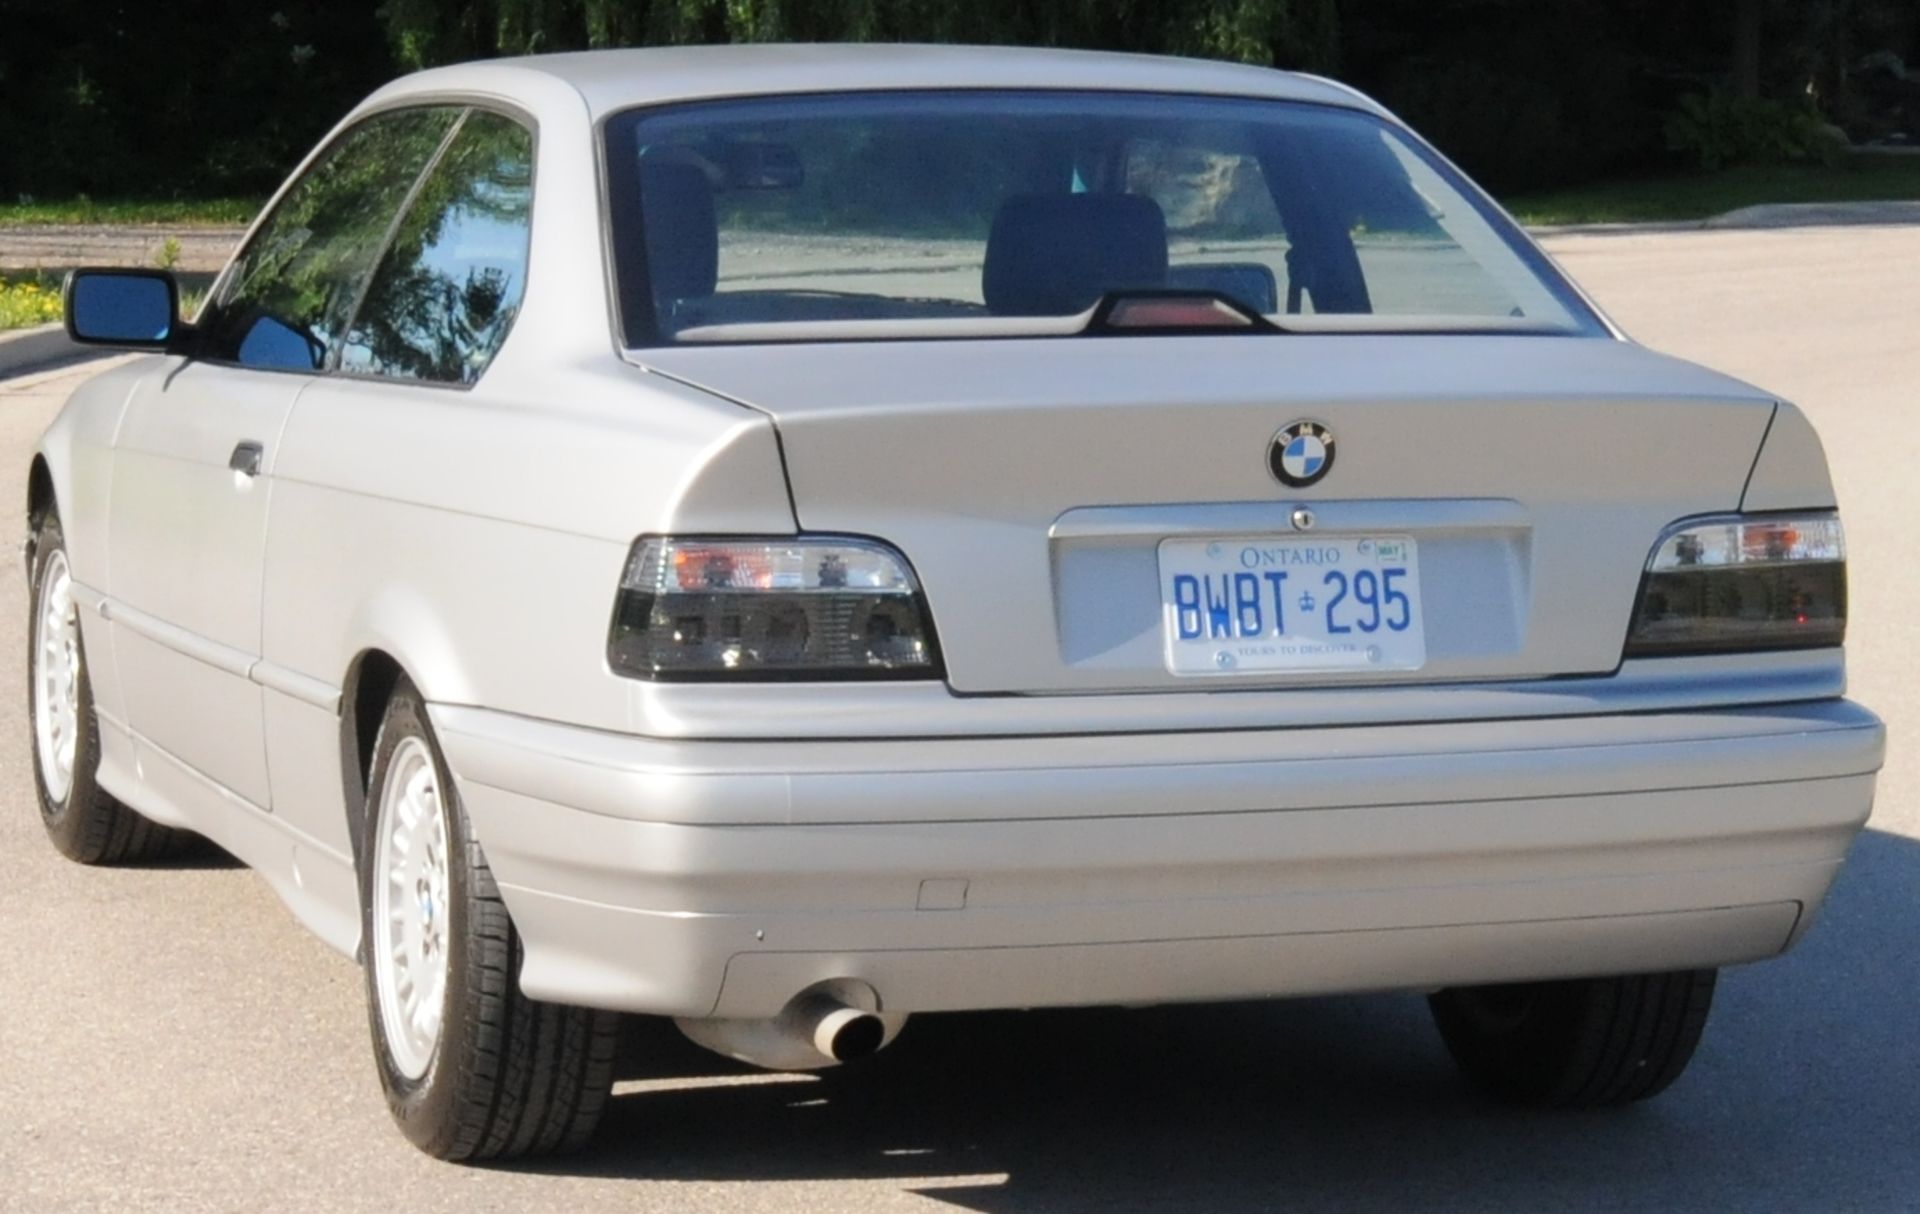 BMW (1993) E36 316IS COUPE WITH 1.8L VANOS VVT ENGINE, 5 SPEED MANUAL TRANSMISSION, REAR WHEEL - Bild 4 aus 5